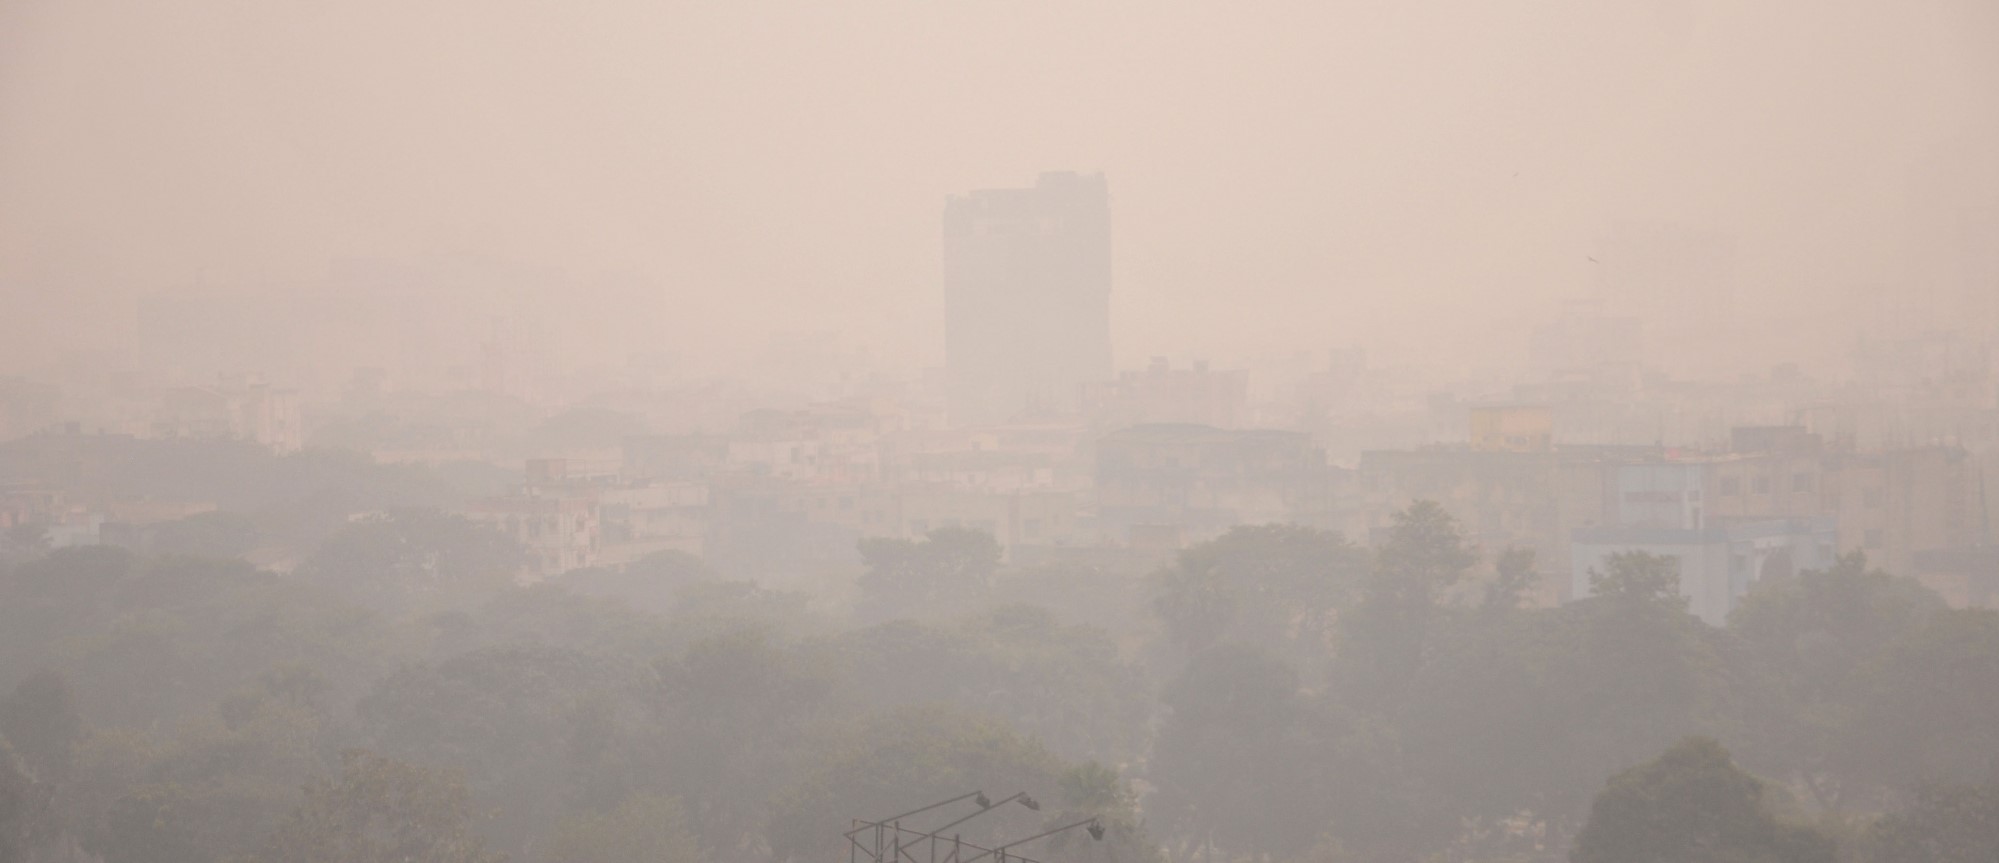 Cold, foggy morning in Delhi, haze to remain throughout the day